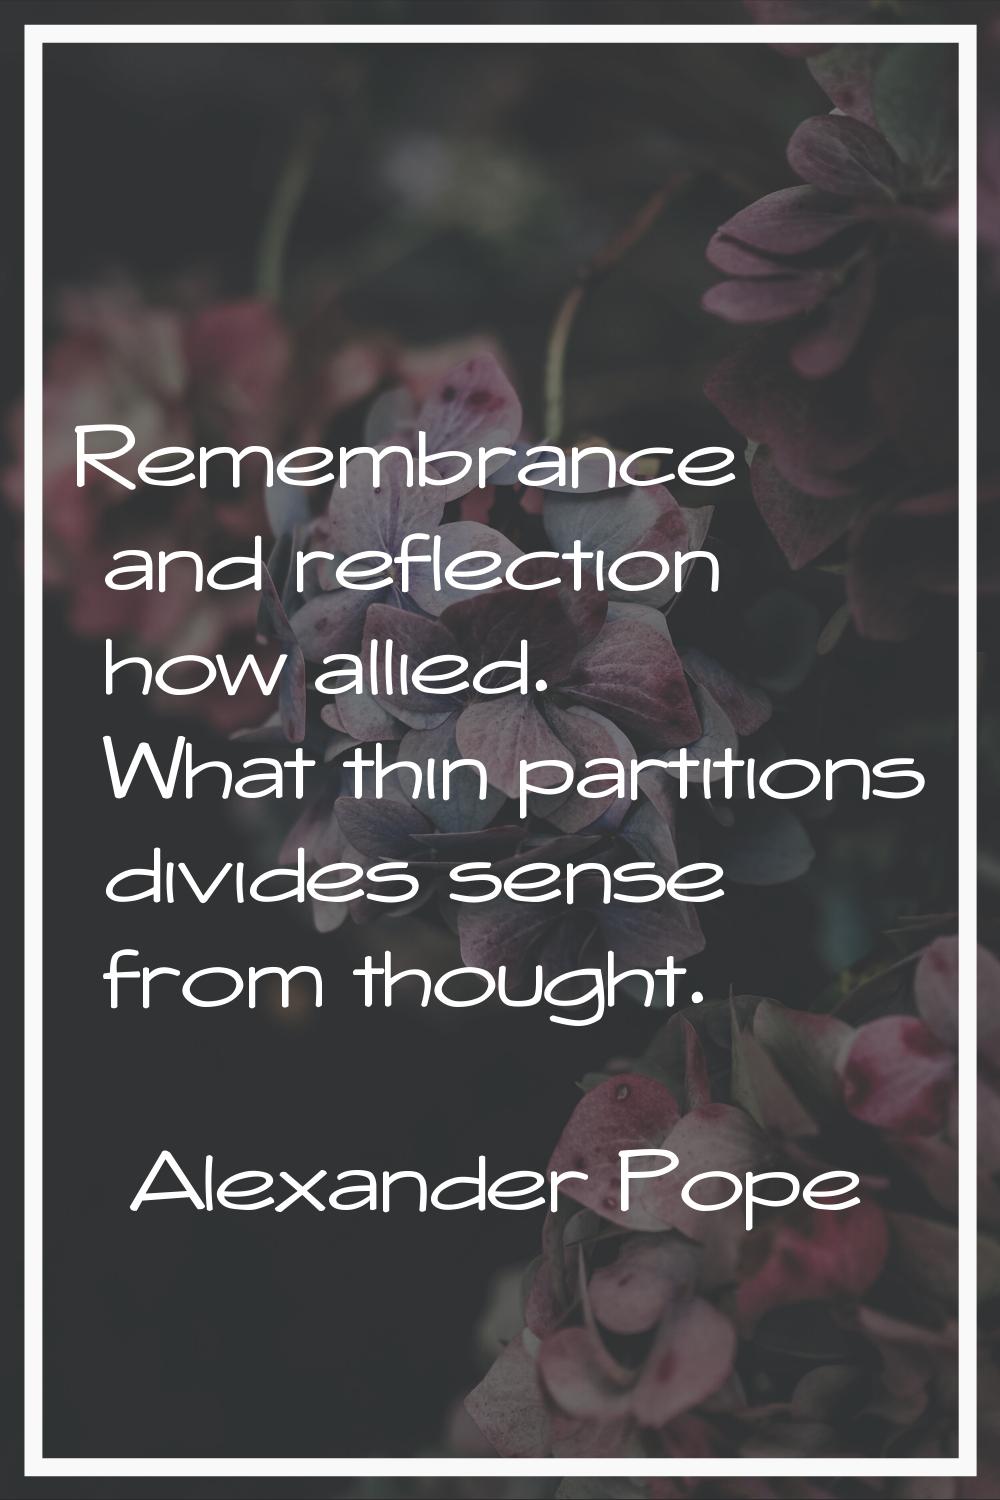 Remembrance and reflection how allied. What thin partitions divides sense from thought.